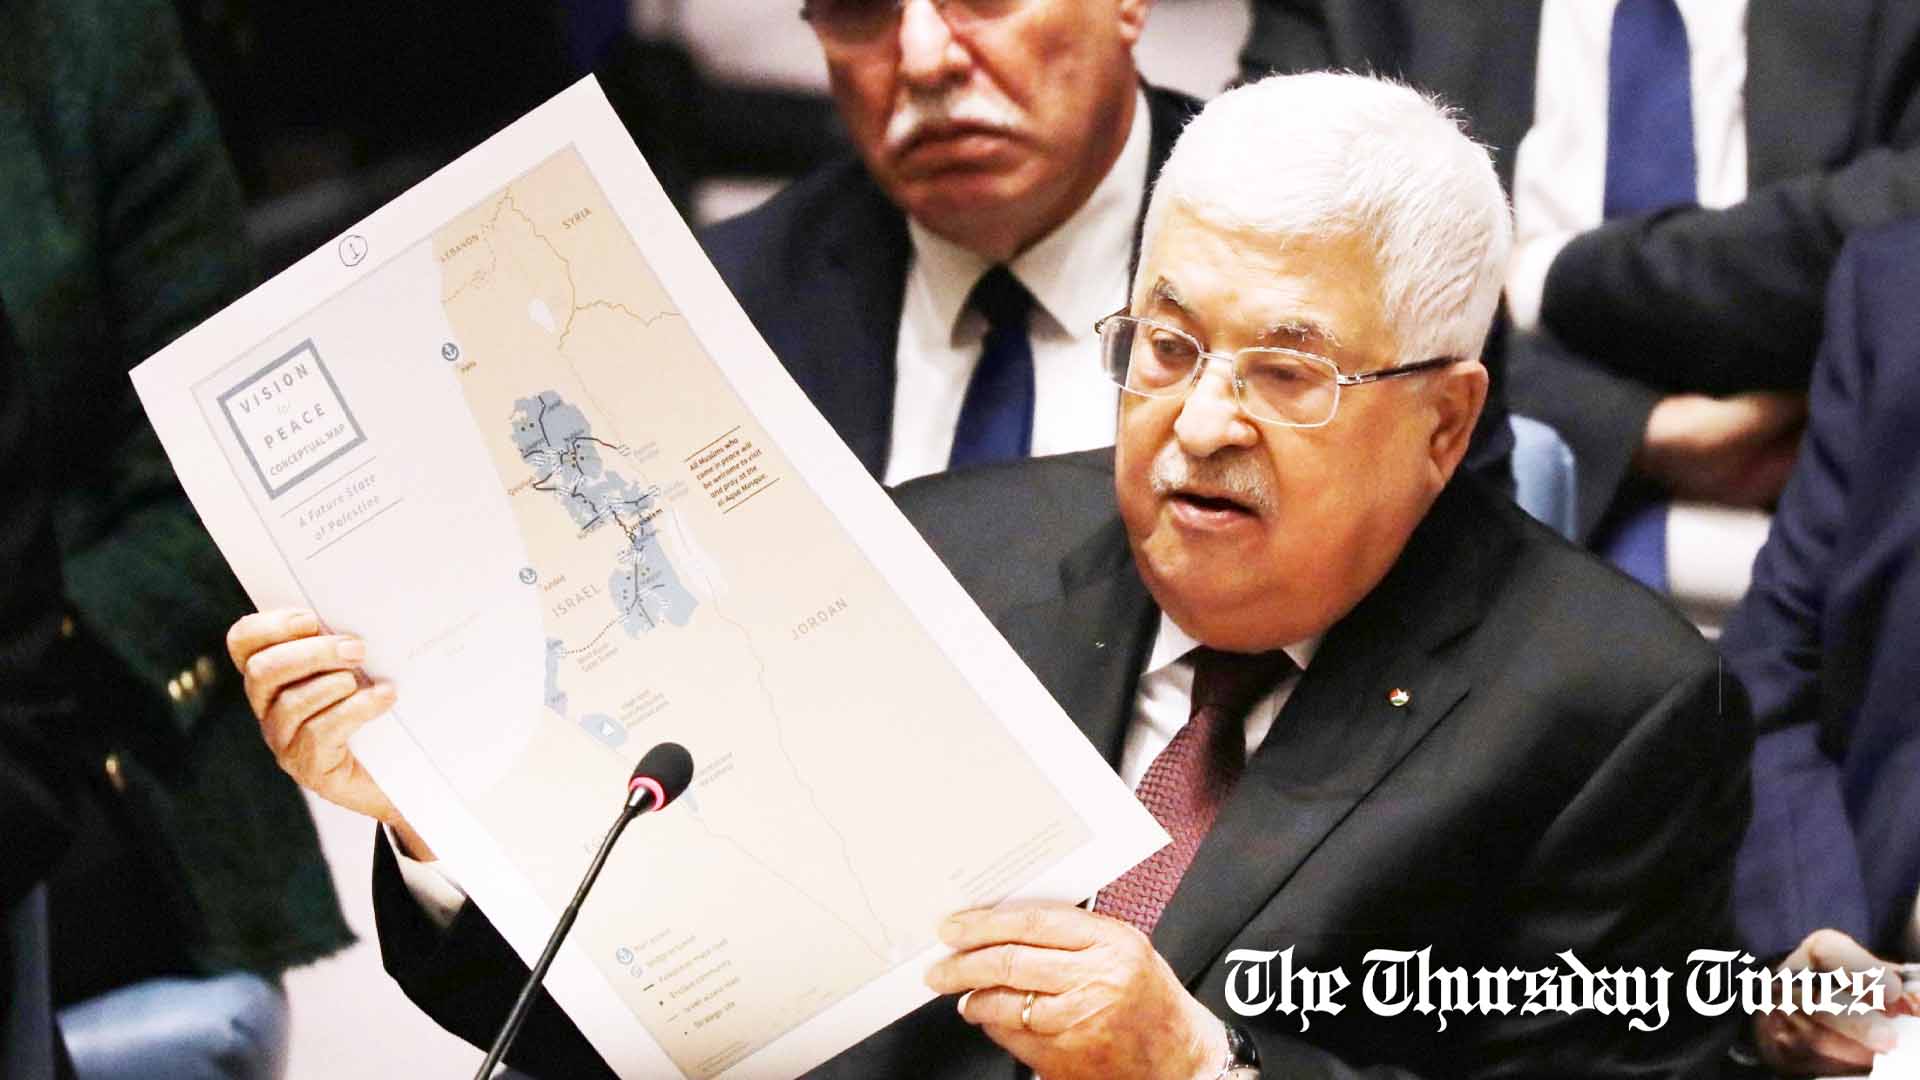 Palestinian President Mahmoud Abbas holds up a Vision for Peace map while speaking at the United Nations (UN) Security Council on February 11, 2020 in New York City. — FILE